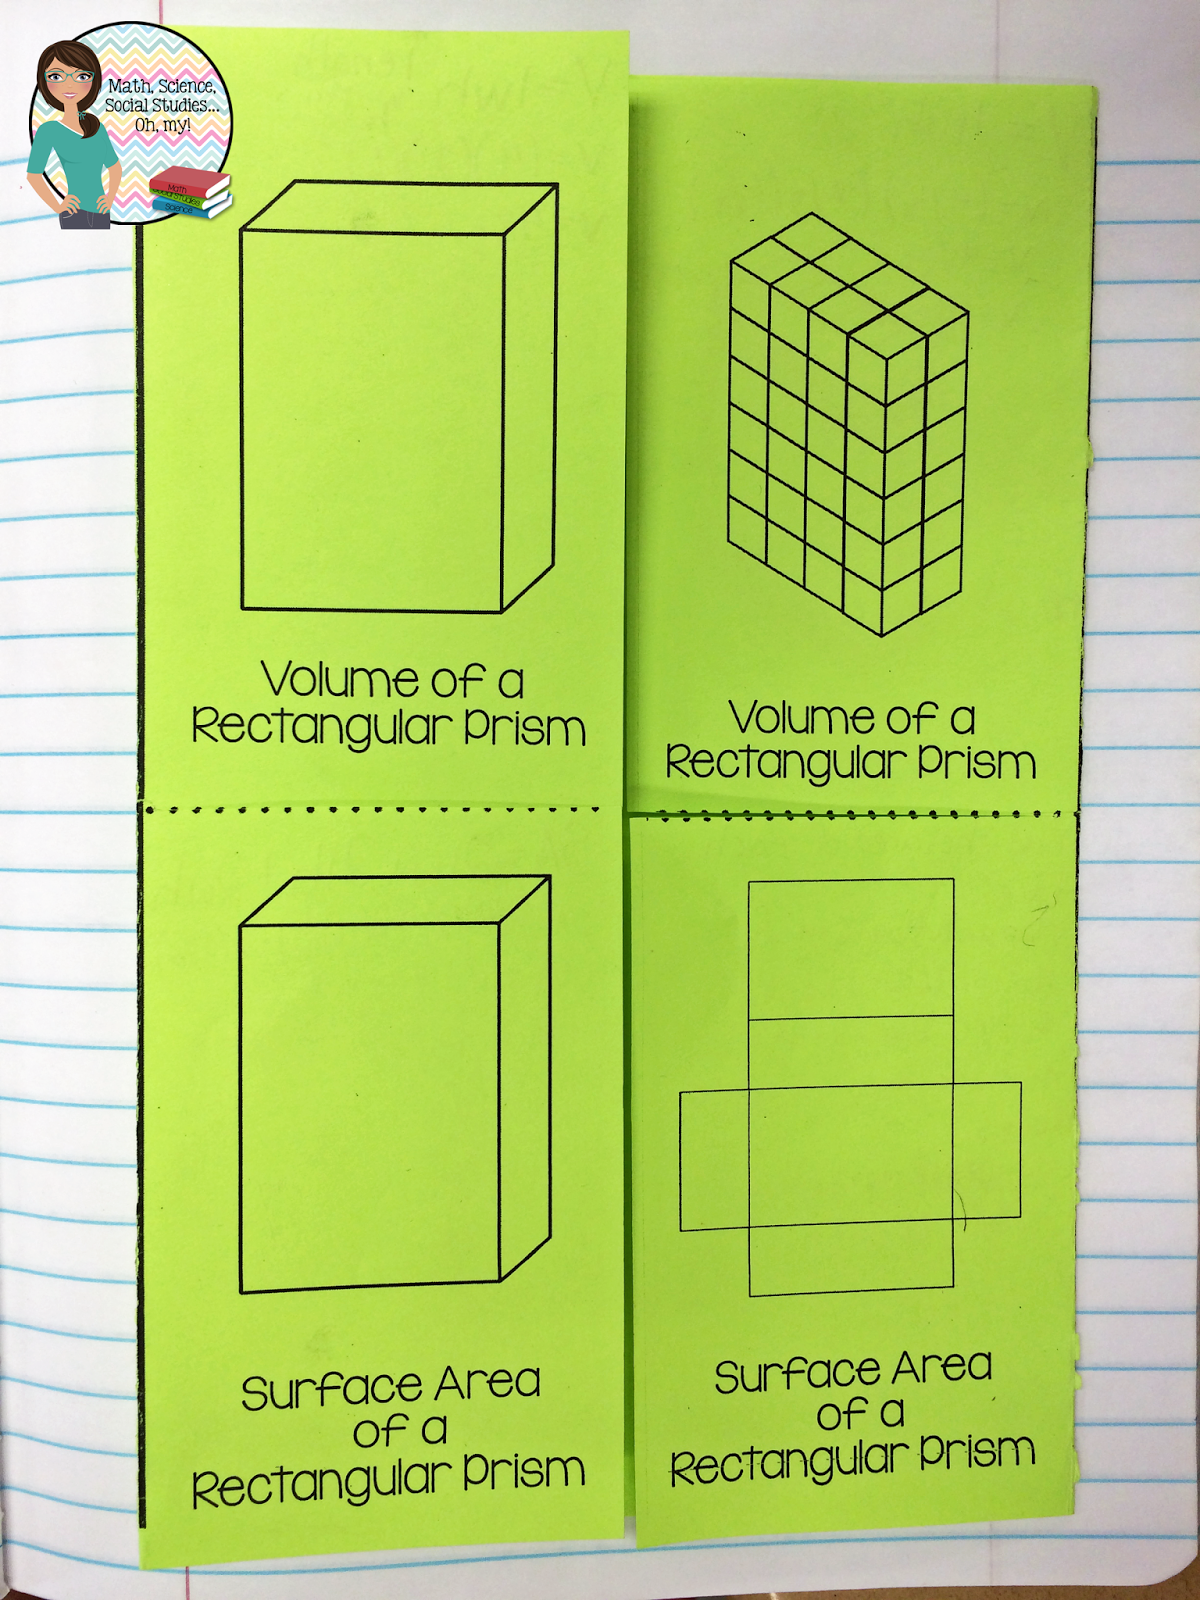 Math, Science, Social Studies......Oh, my!: Surface Area Using Nets